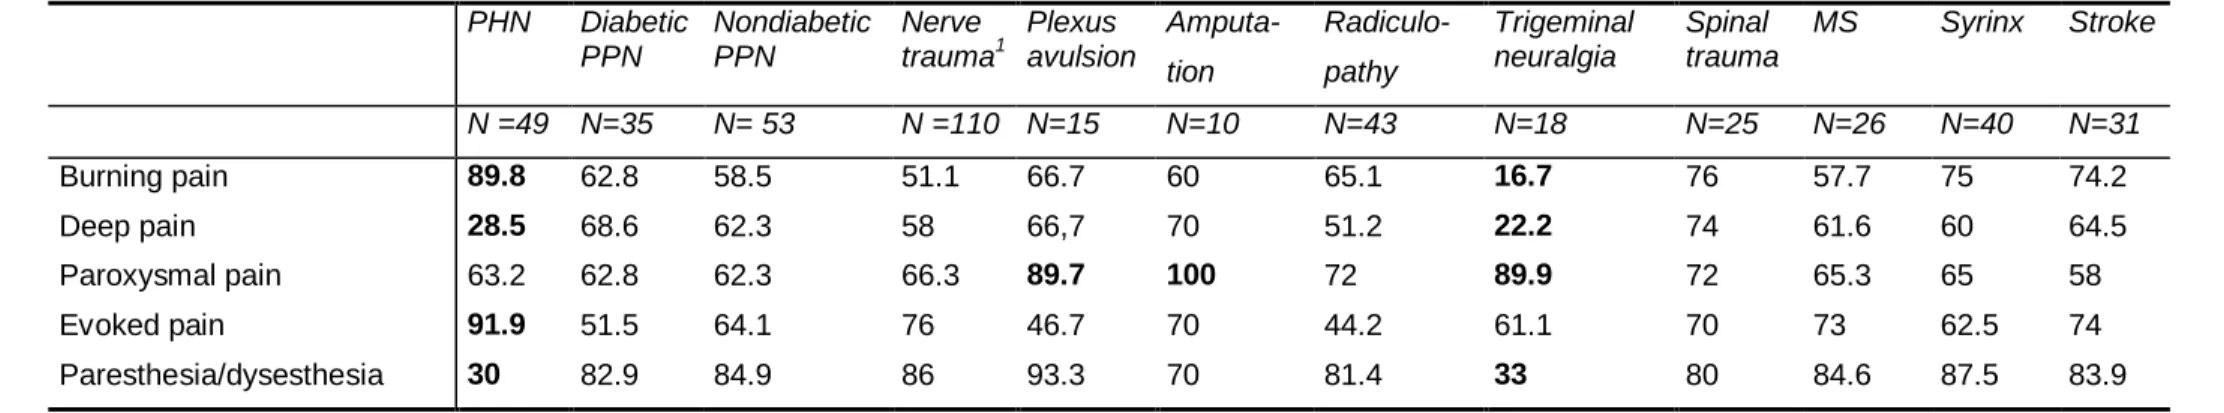 Table 4. Frequency of dimensions of the NPSI (in %) for the most common aetiologies of neuropathic pain included in the study (n   10 patients)